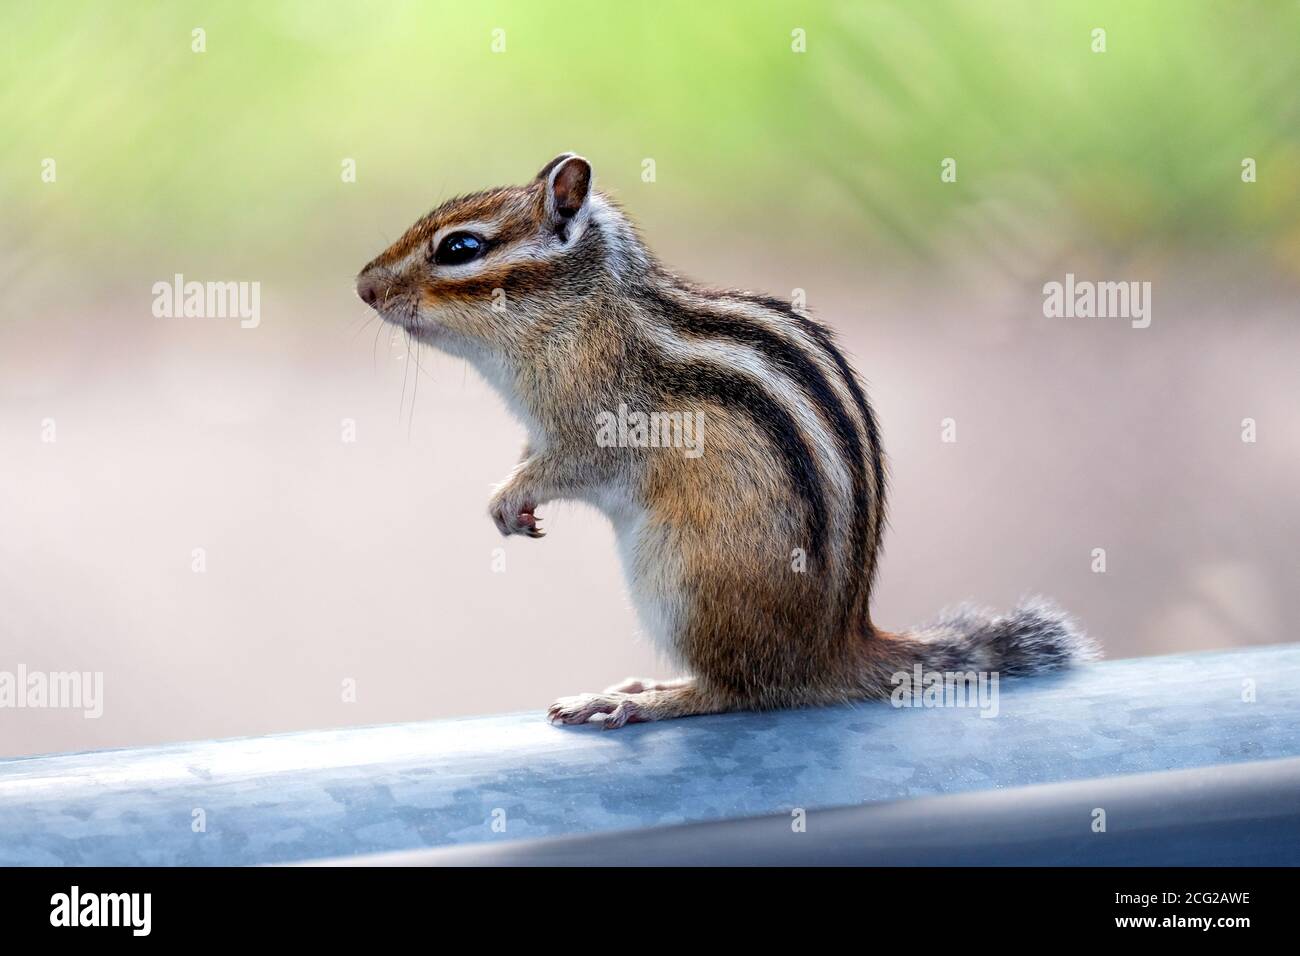 The chipmunk sits on its hind legs. Small brown wild animal with stripes on the back. Stock Photo